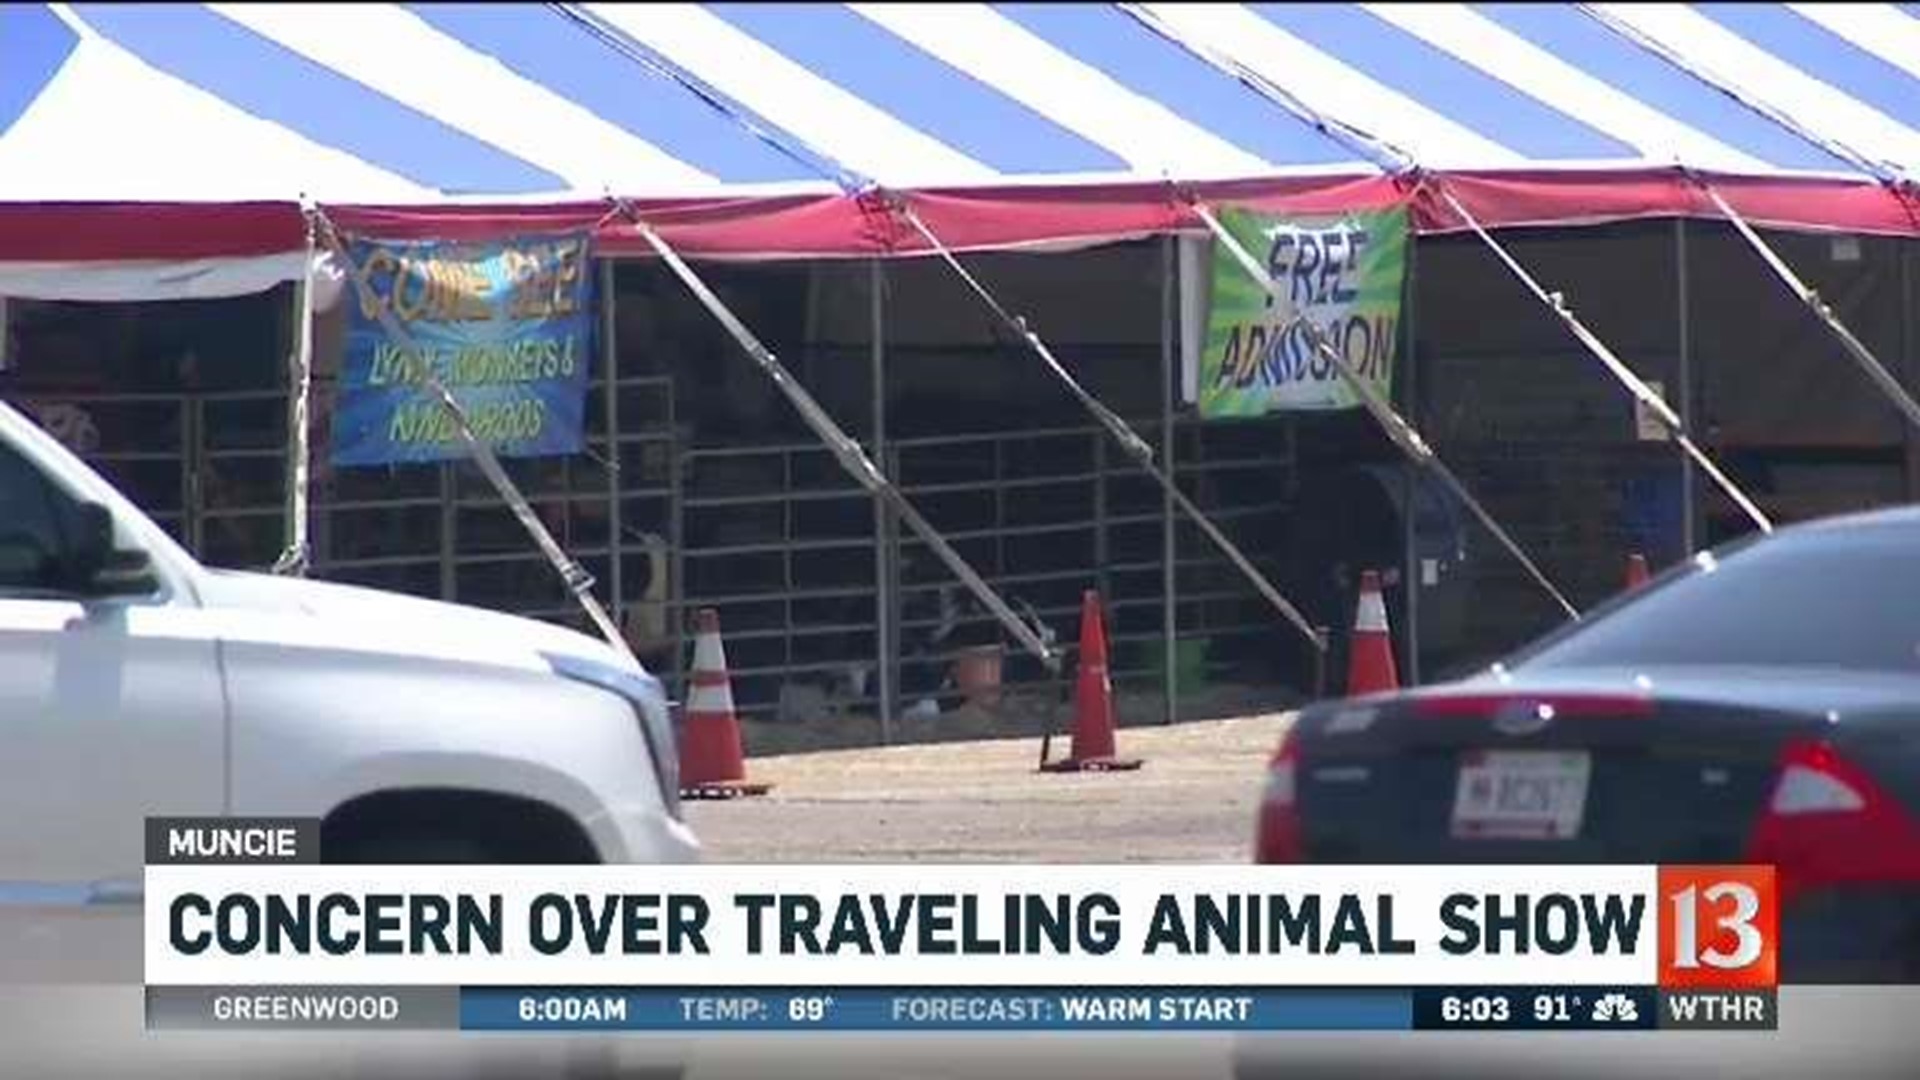 Concern over traveling animal show